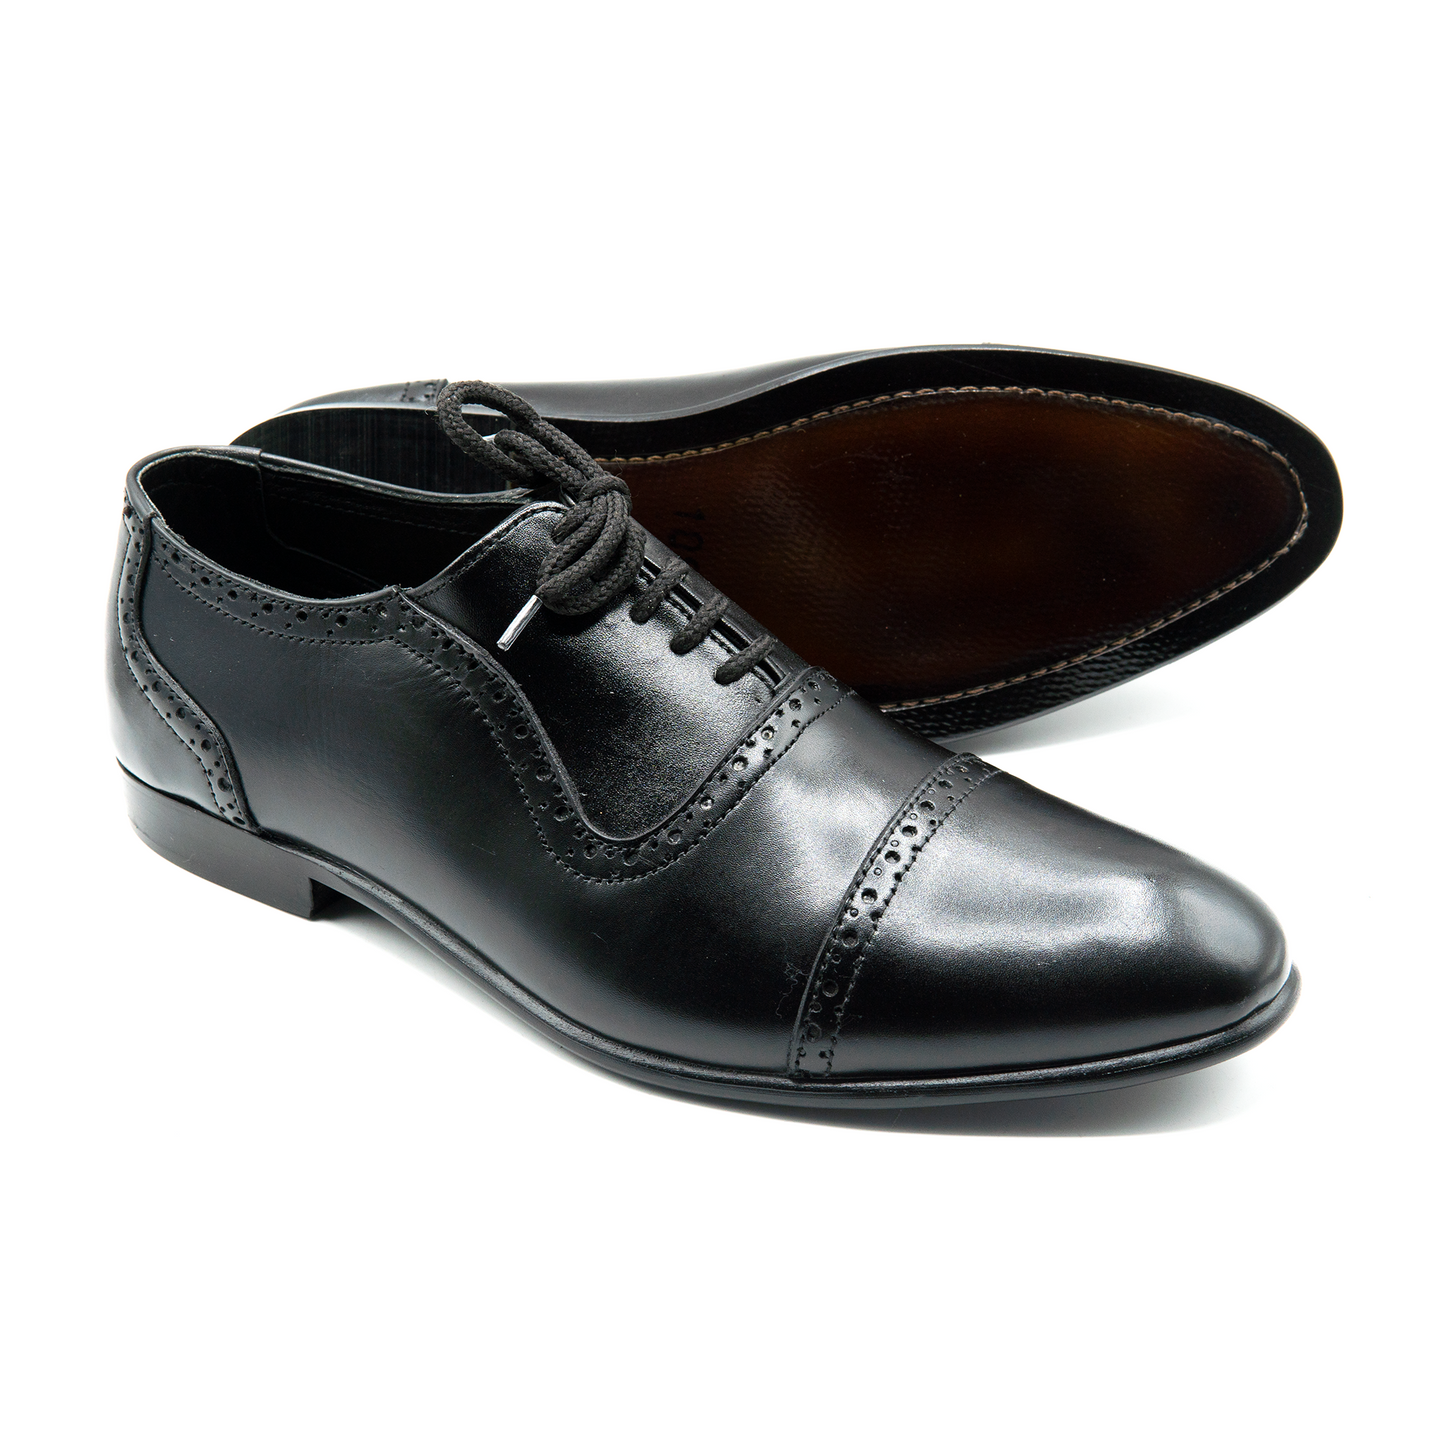 Black Leather Brogues Executive Shoes